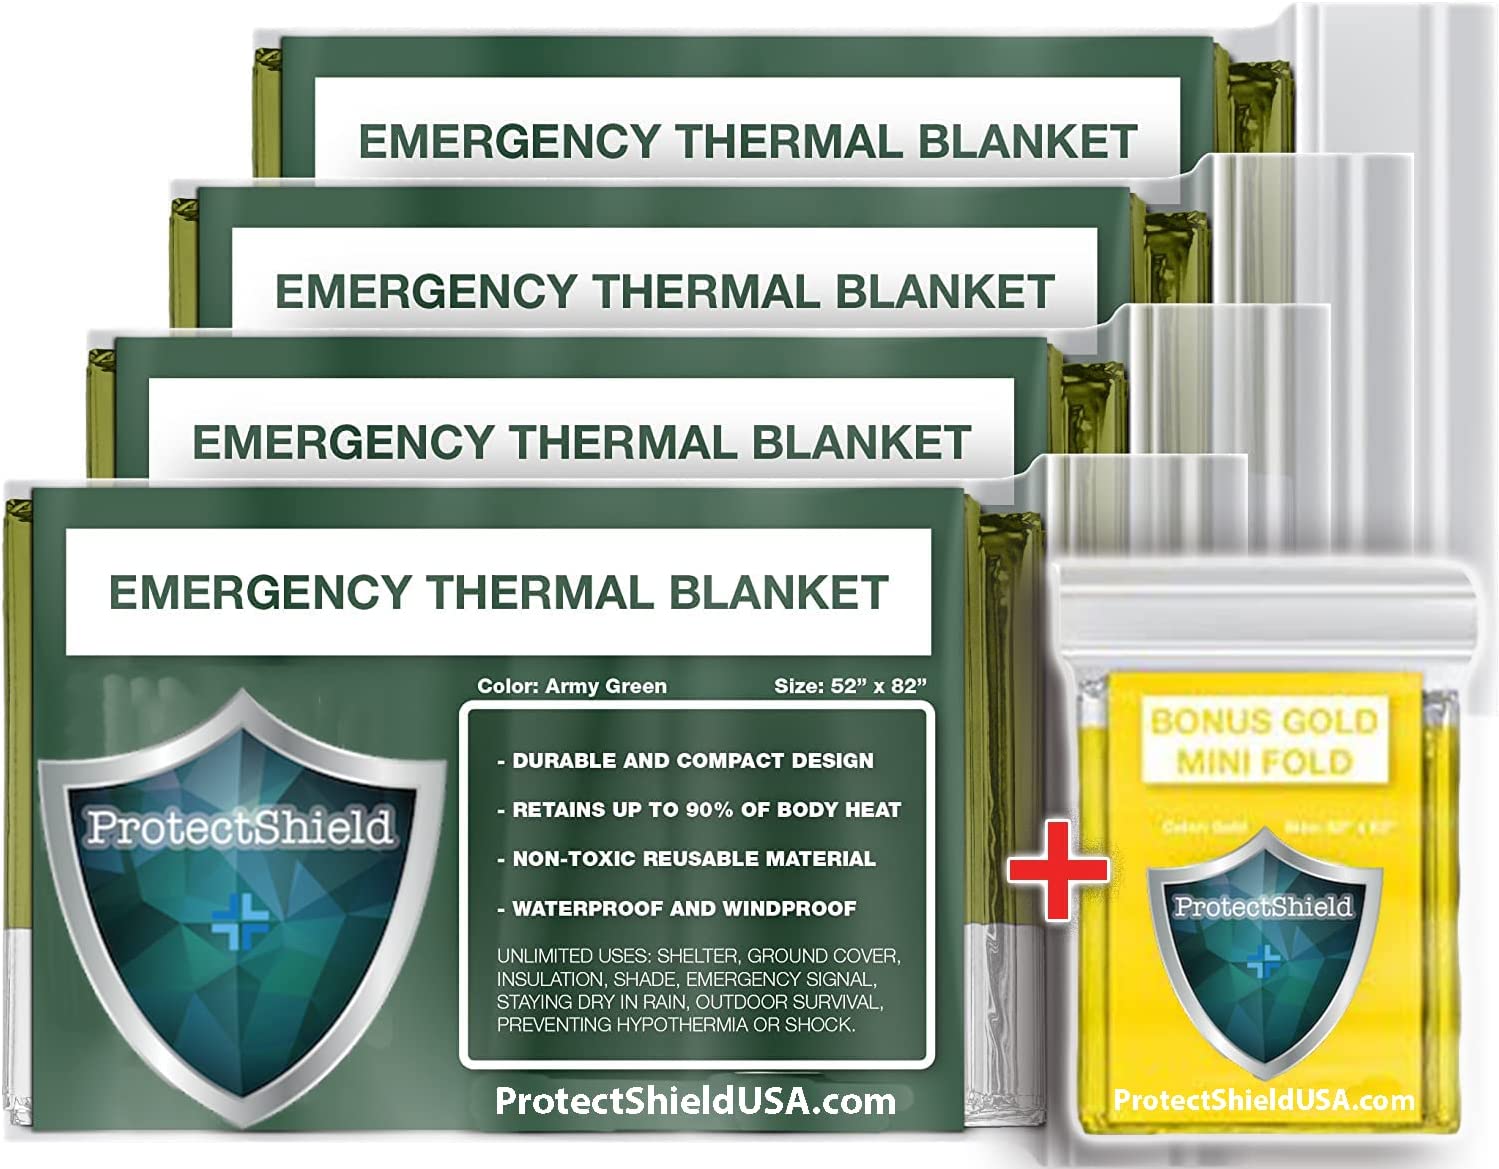 ProtectShield Emergency Mylar Thermal Blankets + Bonus Gold Foil Space Blanket. Designed for NASA, Outdoors, Survival, First Aid, Army Green, 4 Pack (Army Green)